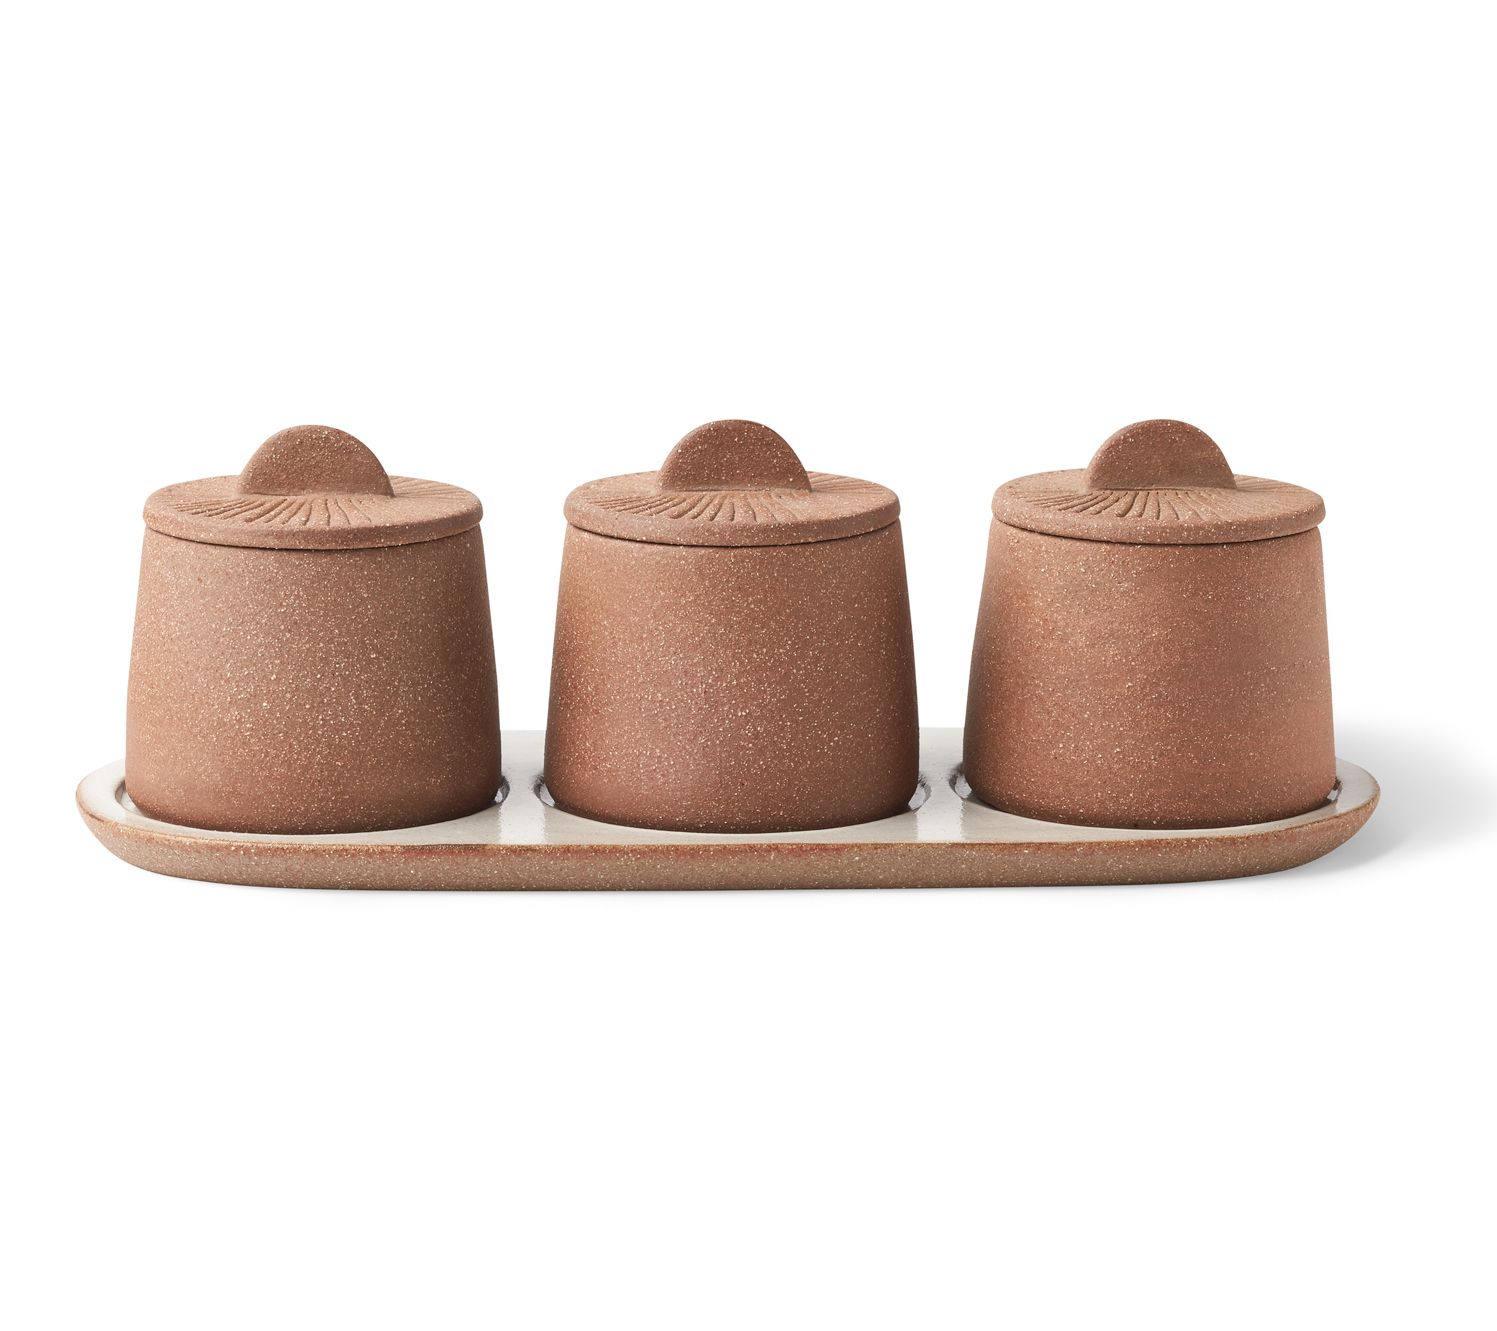 Citrine Canyon Set of 3 Spice Jars, Size Small, Terracotta